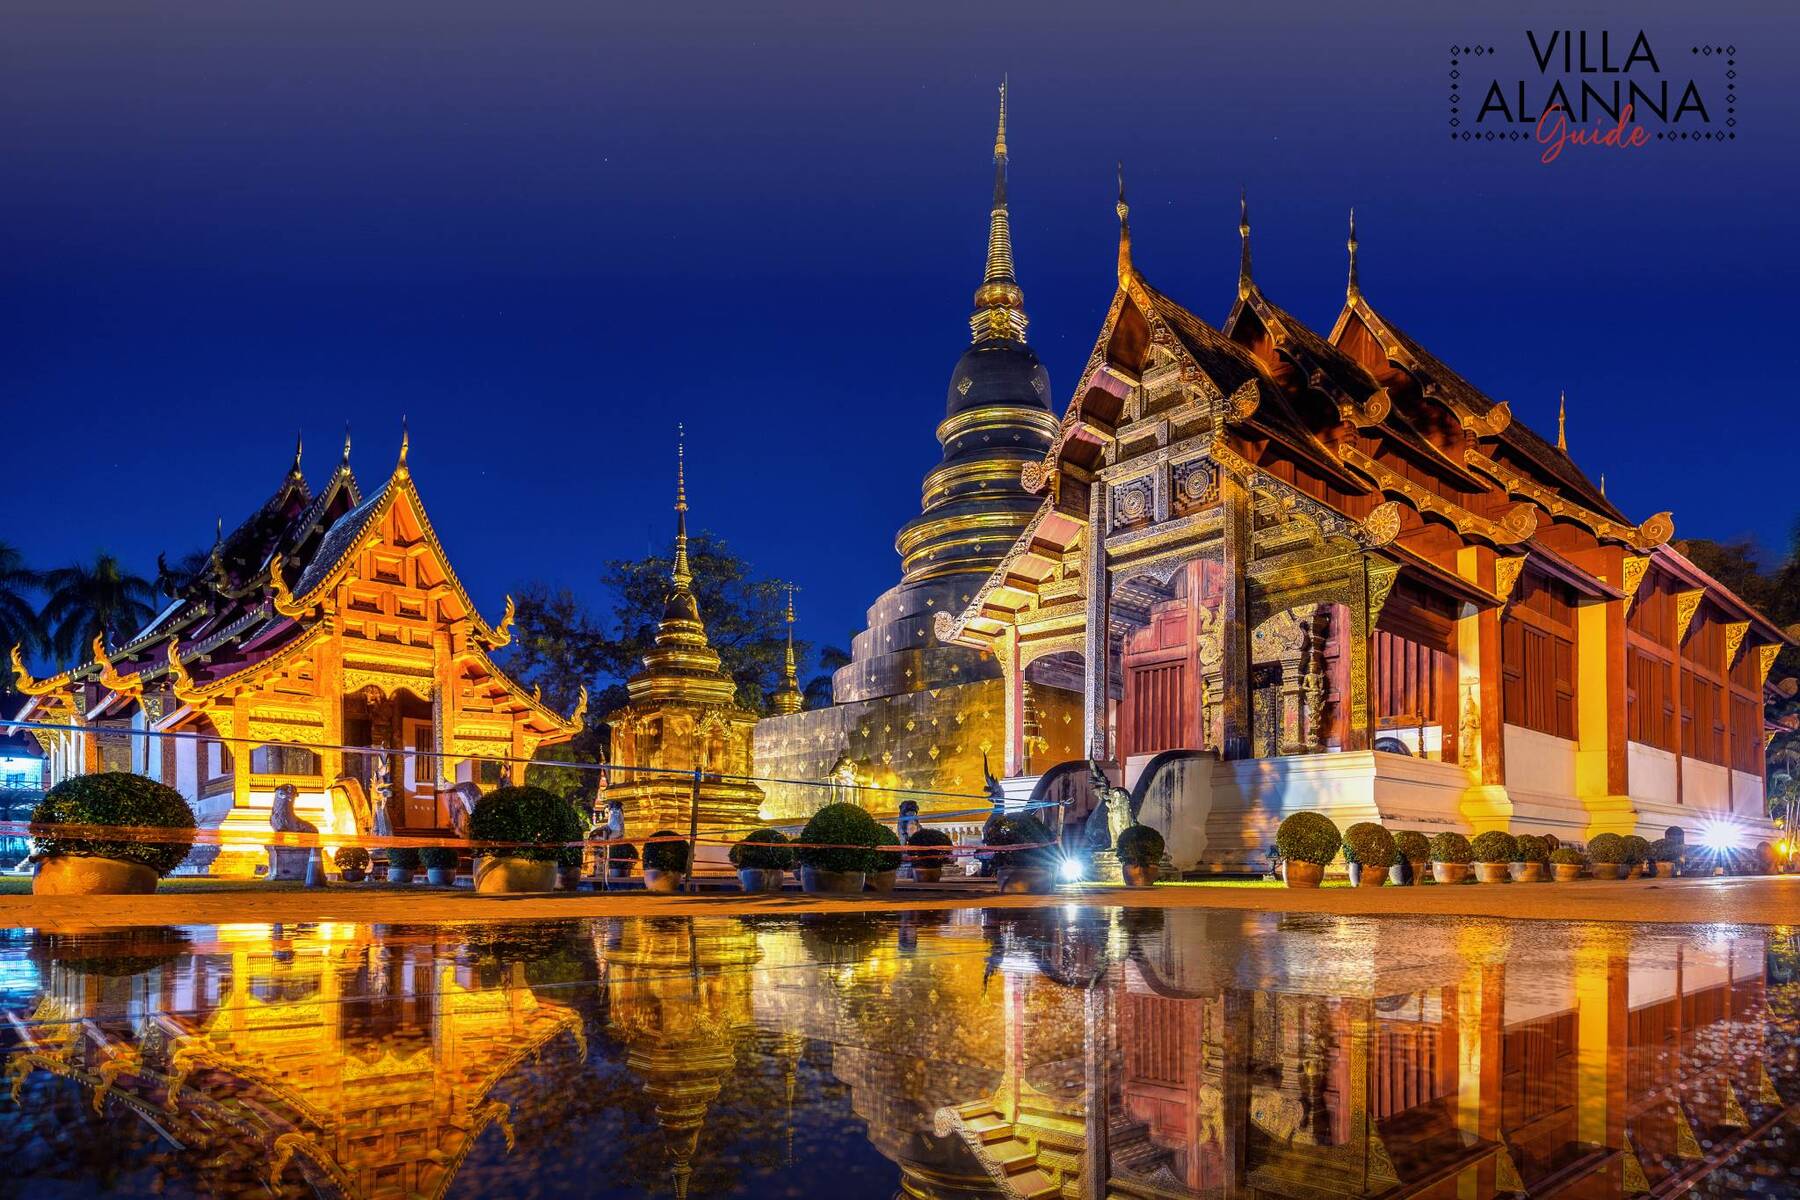 Heritage and Historic Attractions in Chiang Mai